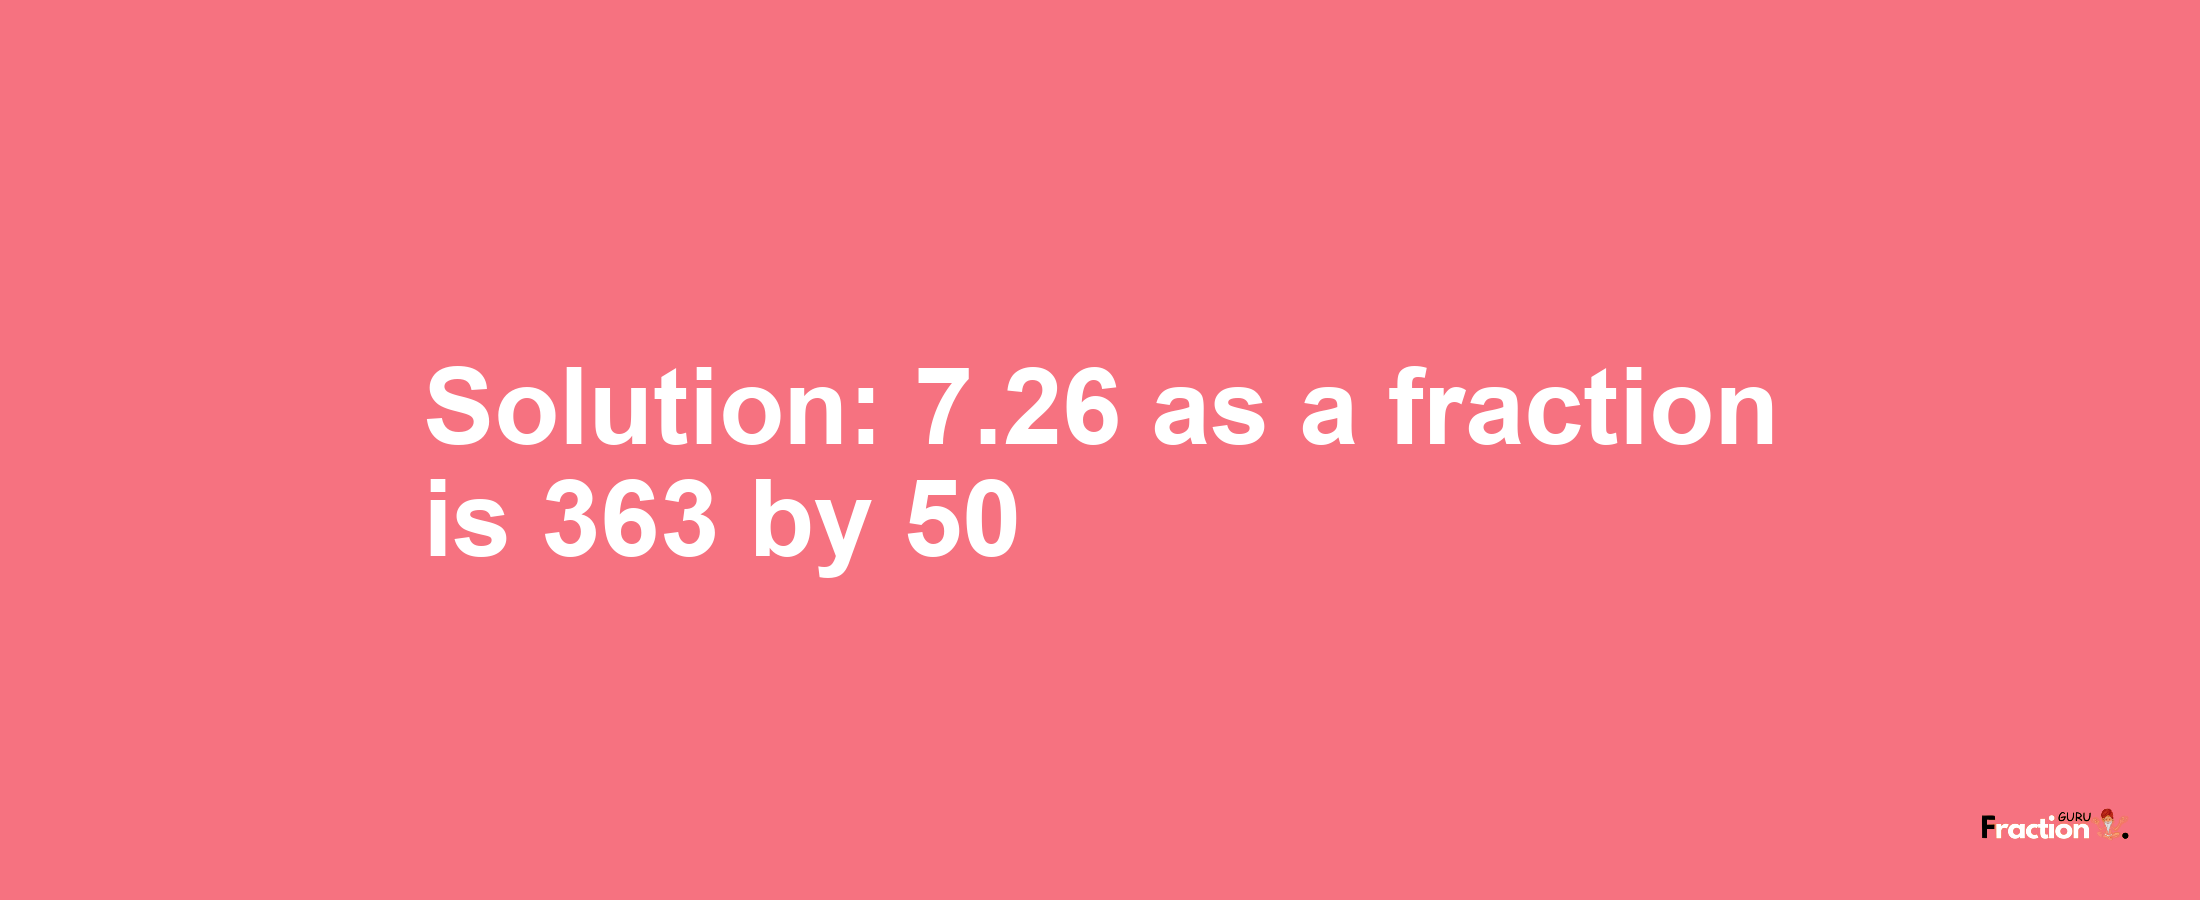 Solution:7.26 as a fraction is 363/50